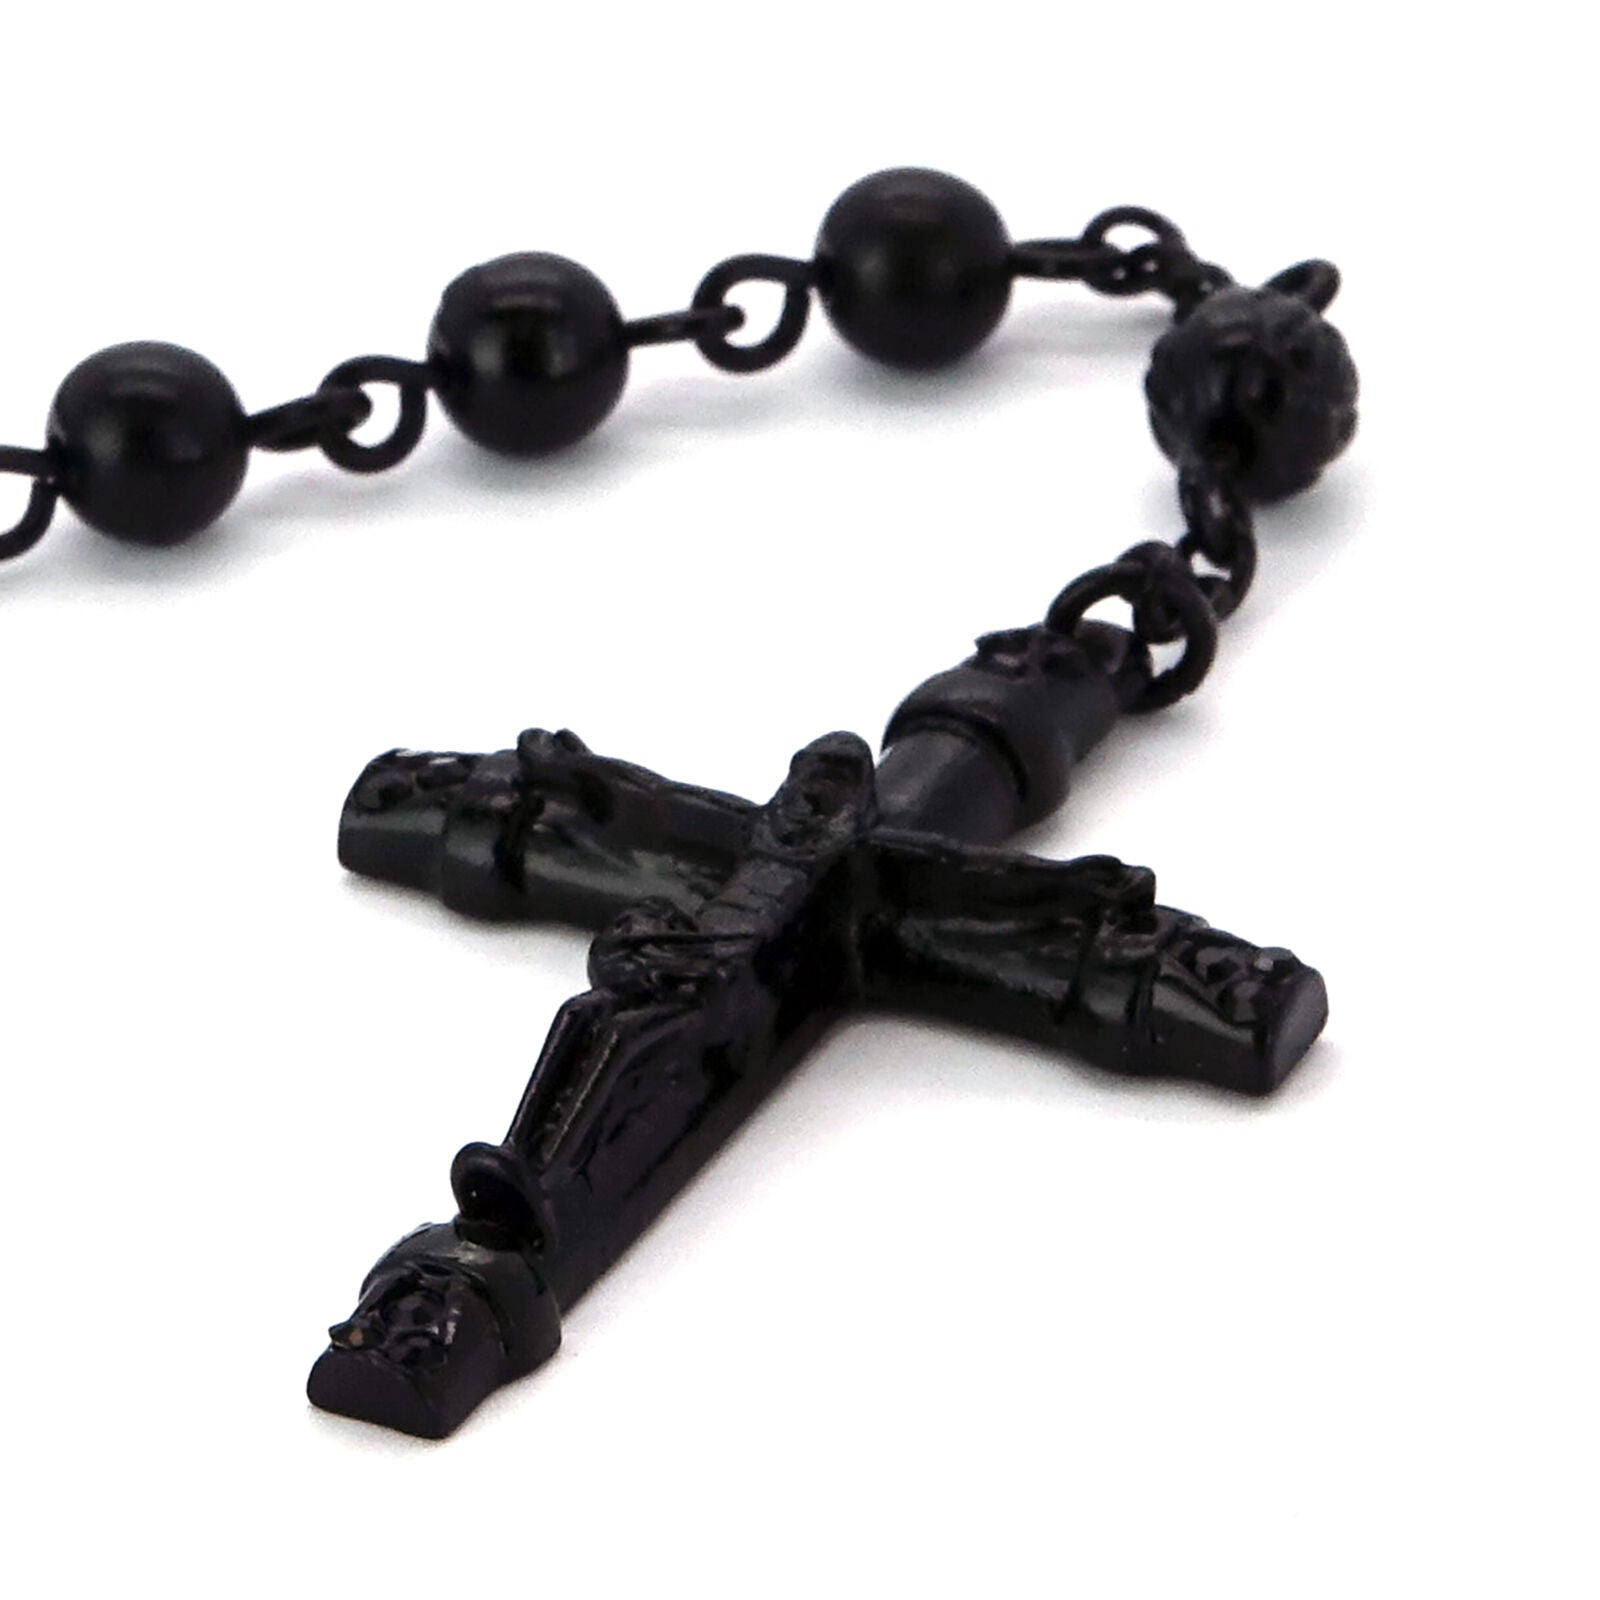 BLACK ROUND GUADALUPE ROSARY